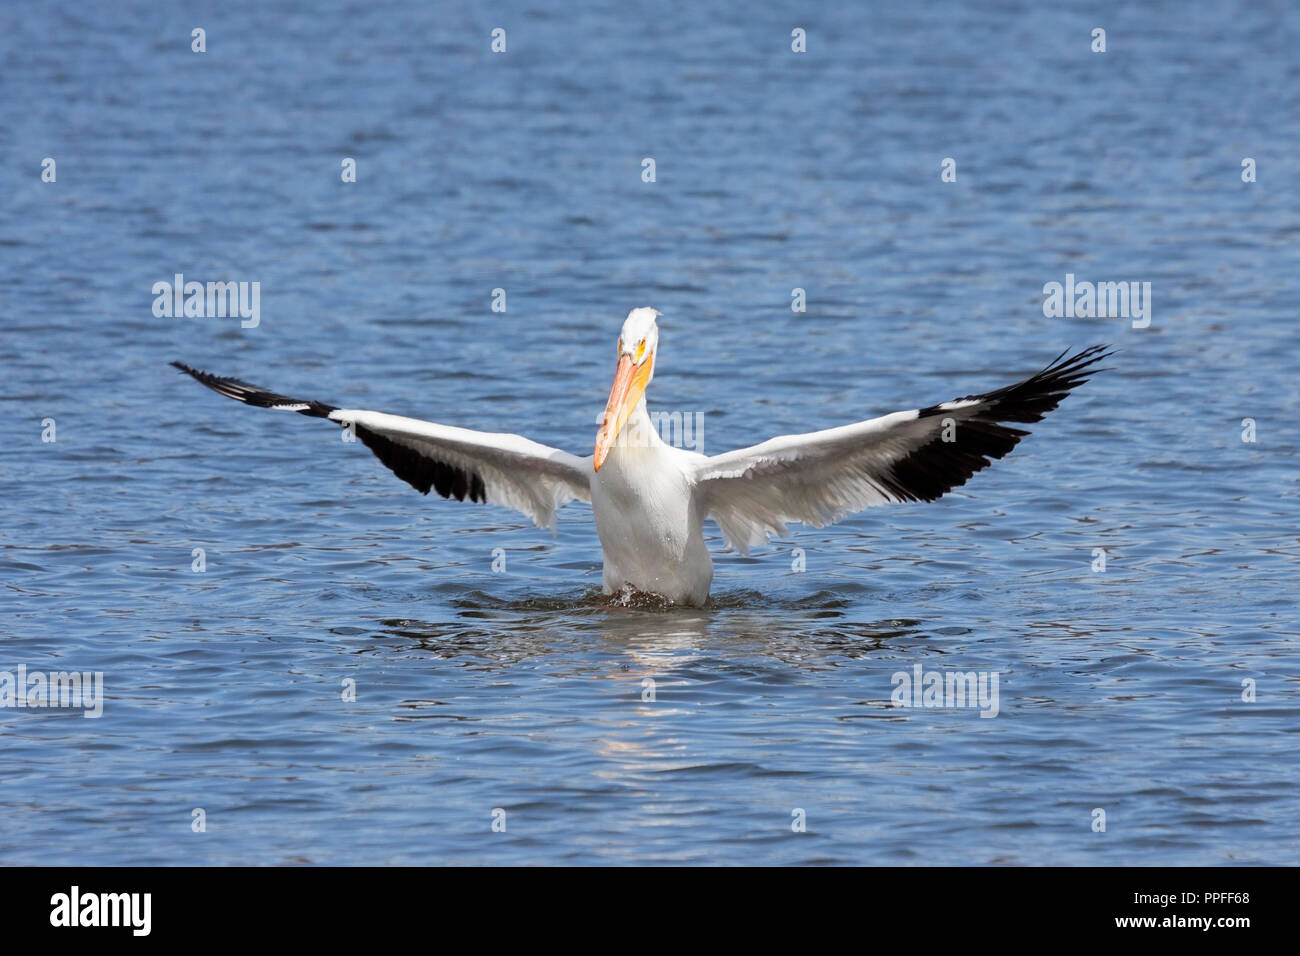 An American white pelican spreads its wings outward and genuflects after a successful landing in a blue lake. Stock Photo